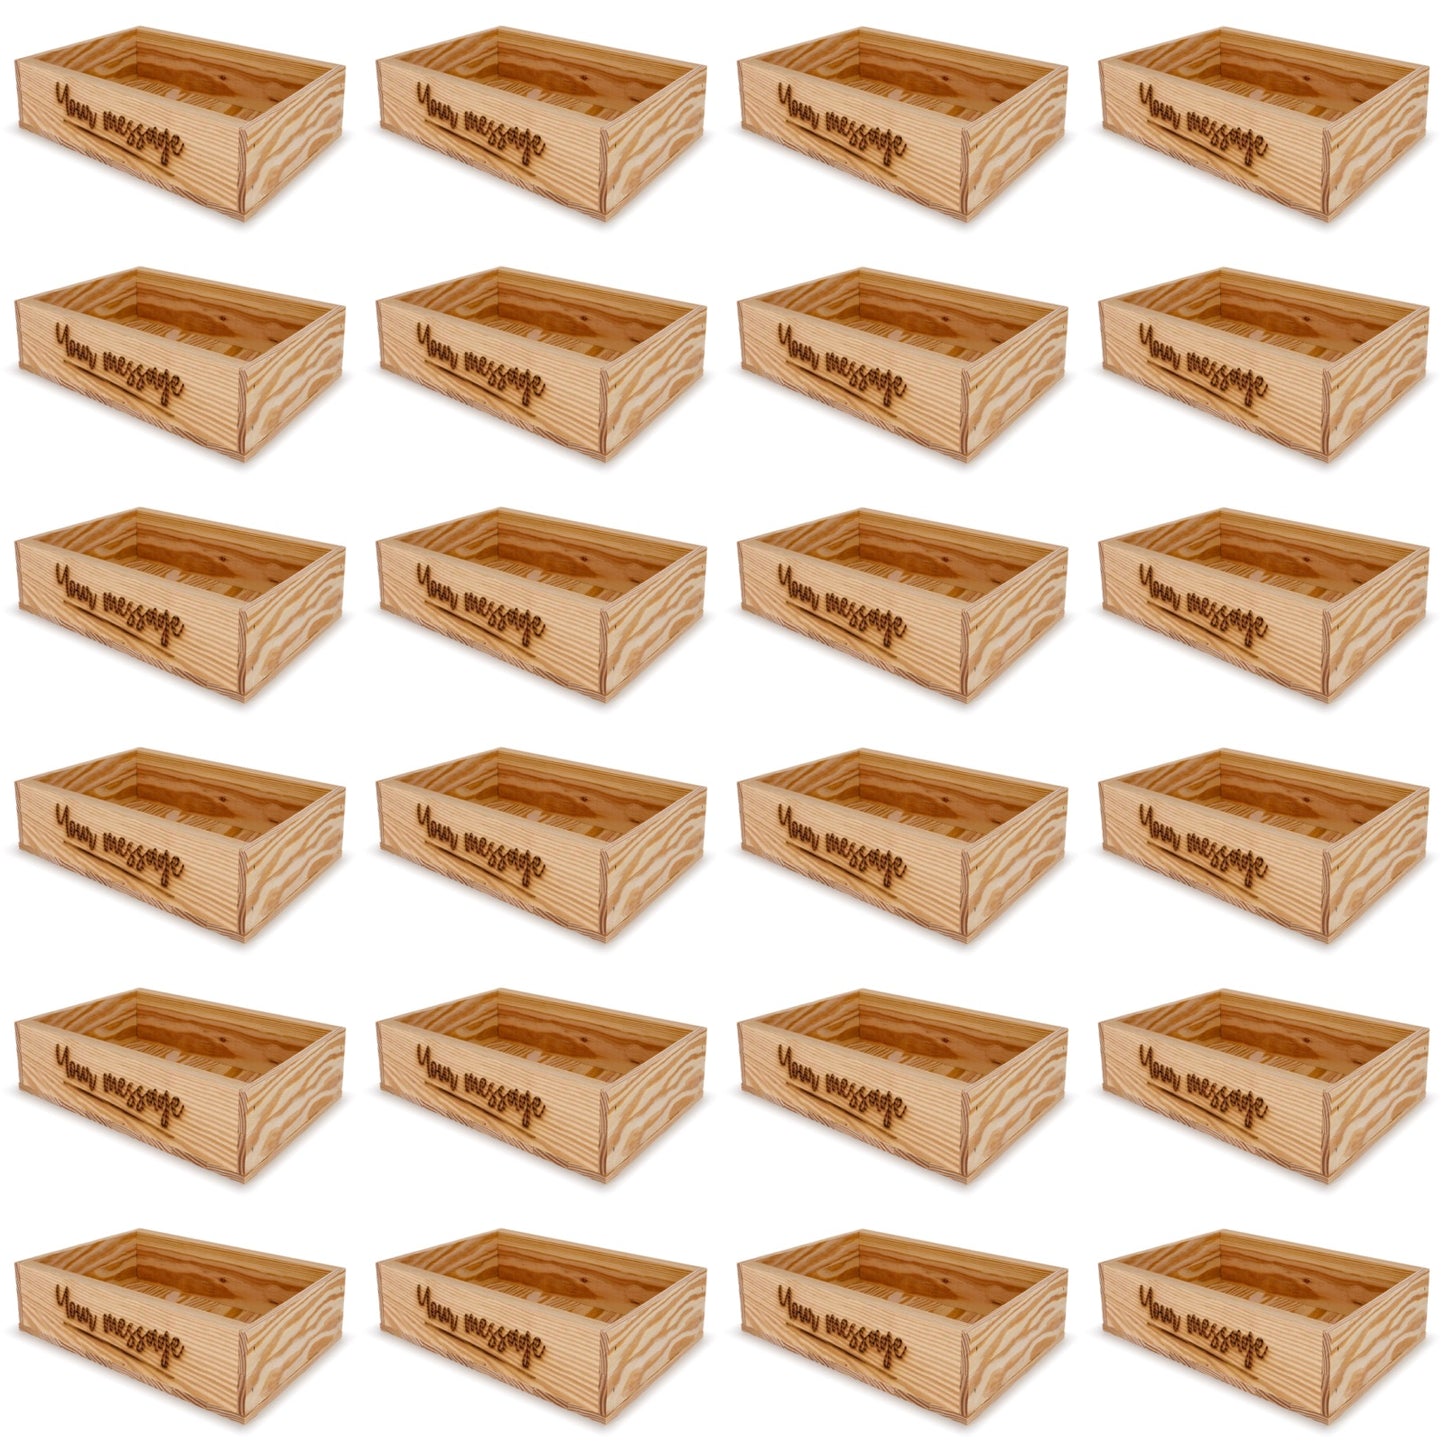 24 Small wooden crates with custom message 8x13.25x3.5